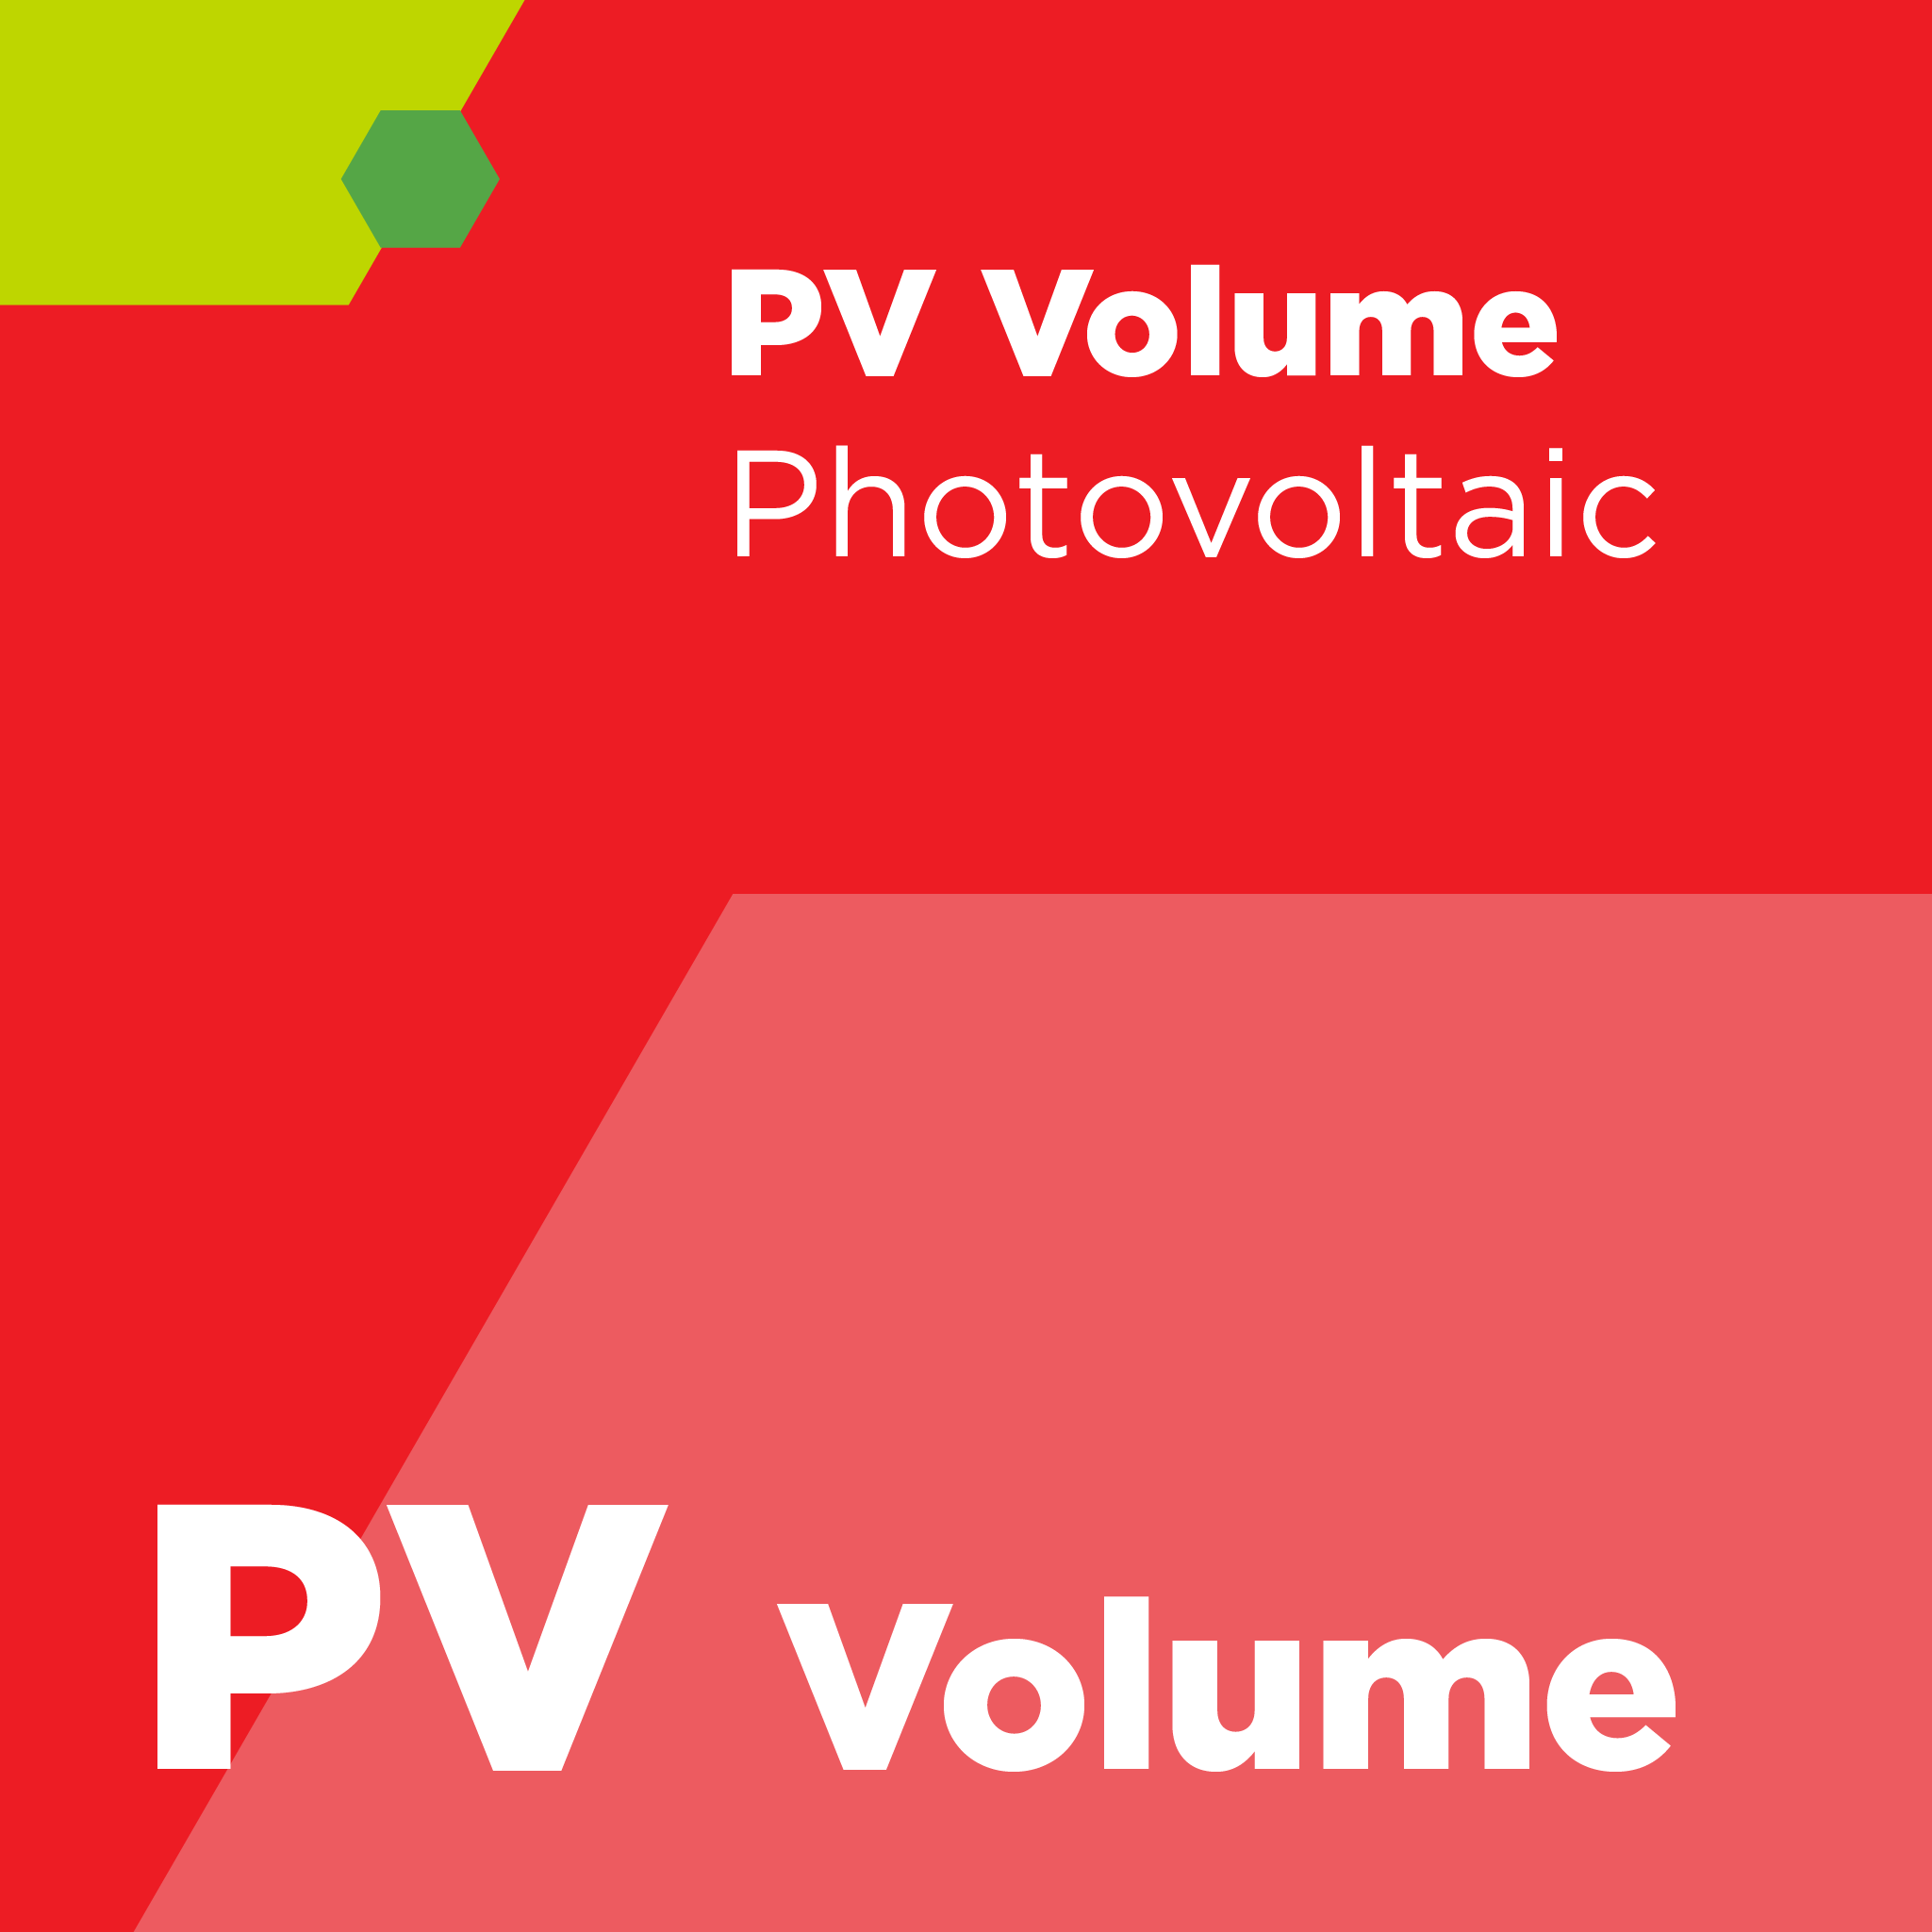 PV00600 - SEMI PV6 - Guide for Argon (Ar), Bulk, Used in Photovoltaic Applications